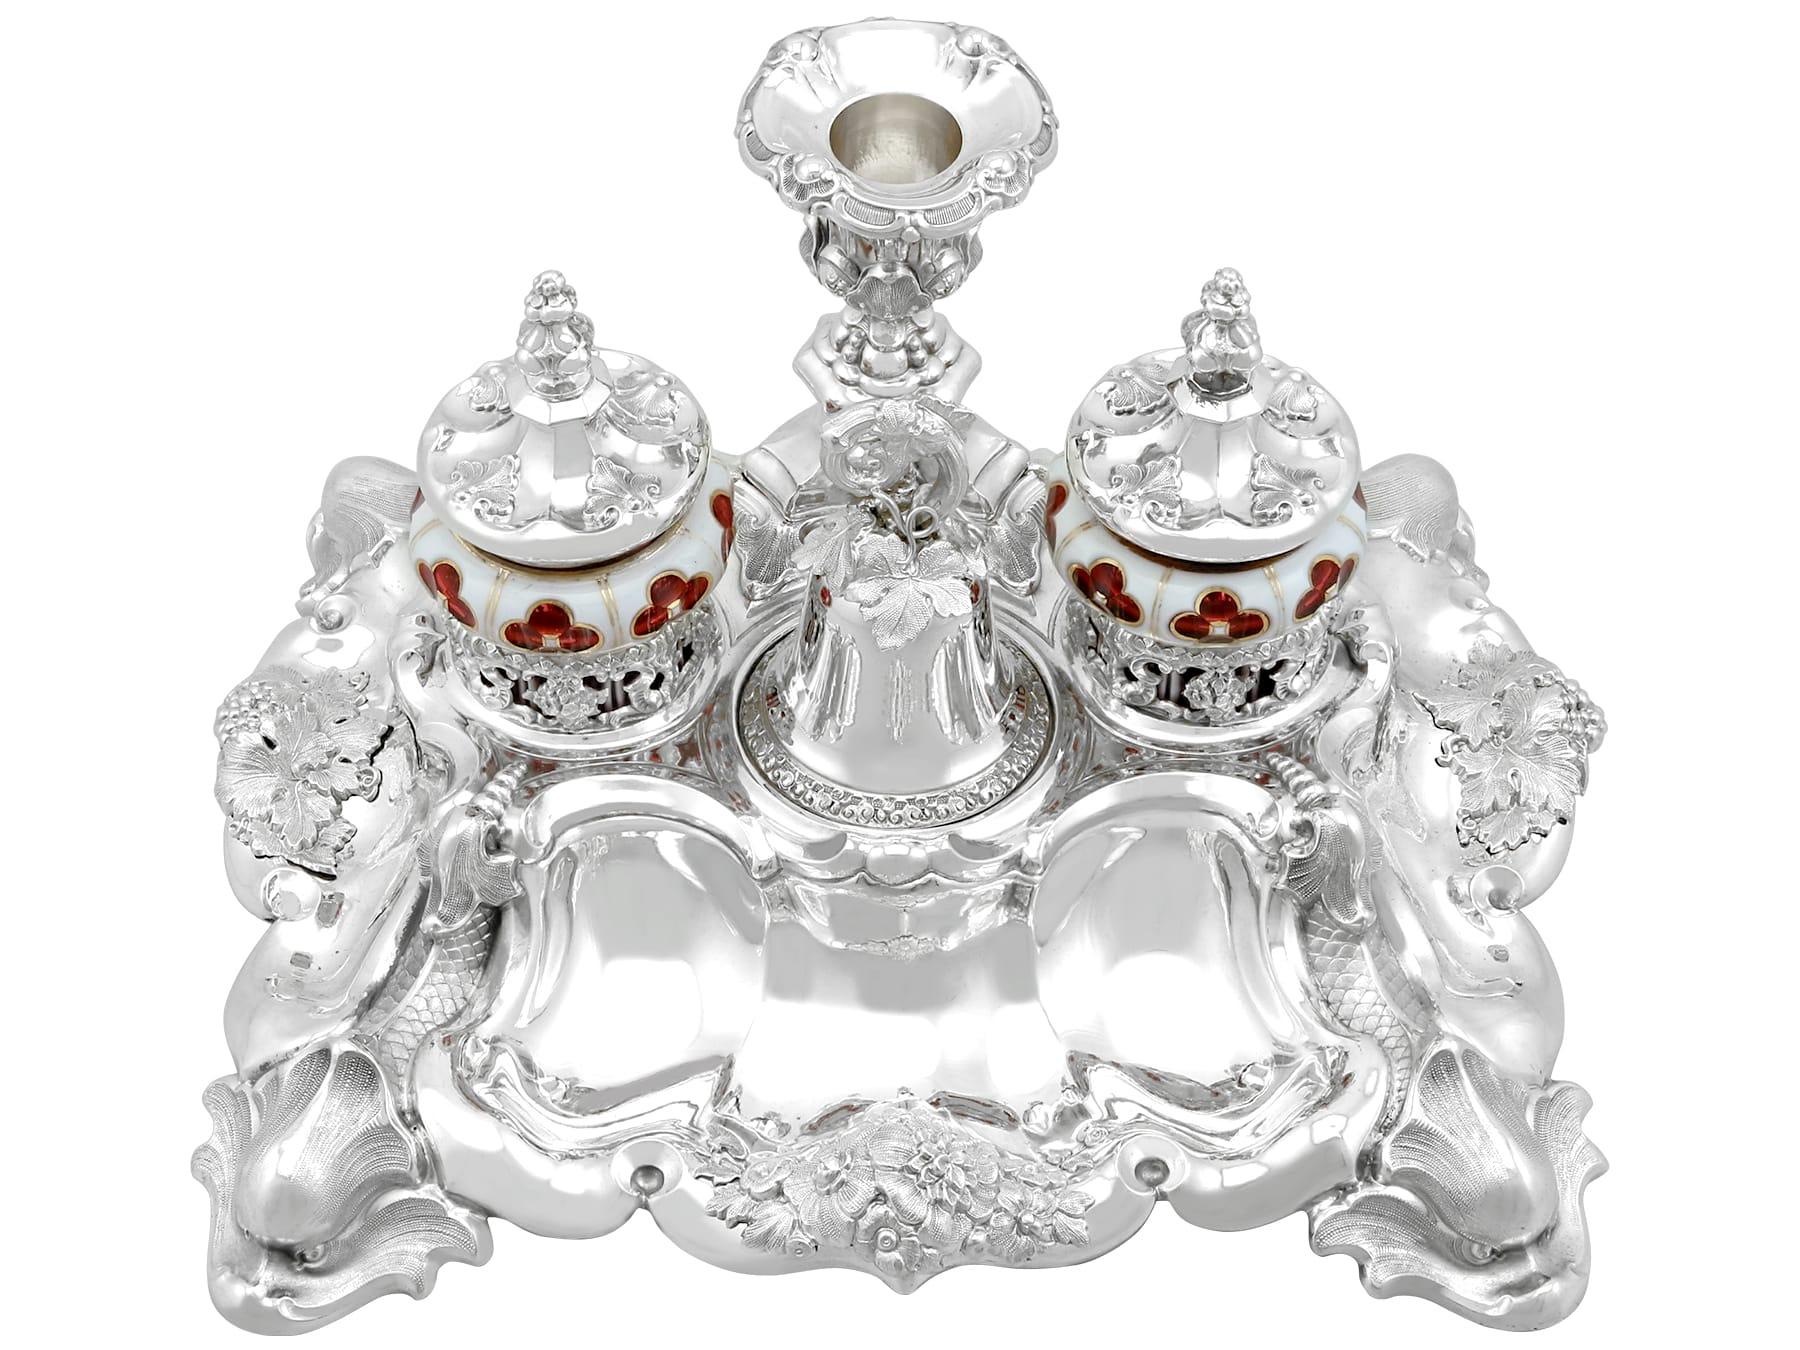 An exceptional, fine and impressive, rare antique European 812 standard silver and Bohemian coloured glass desk standish; an addition to our ornamental silverware collection

This exceptional antique European silver desk standish has an shaped